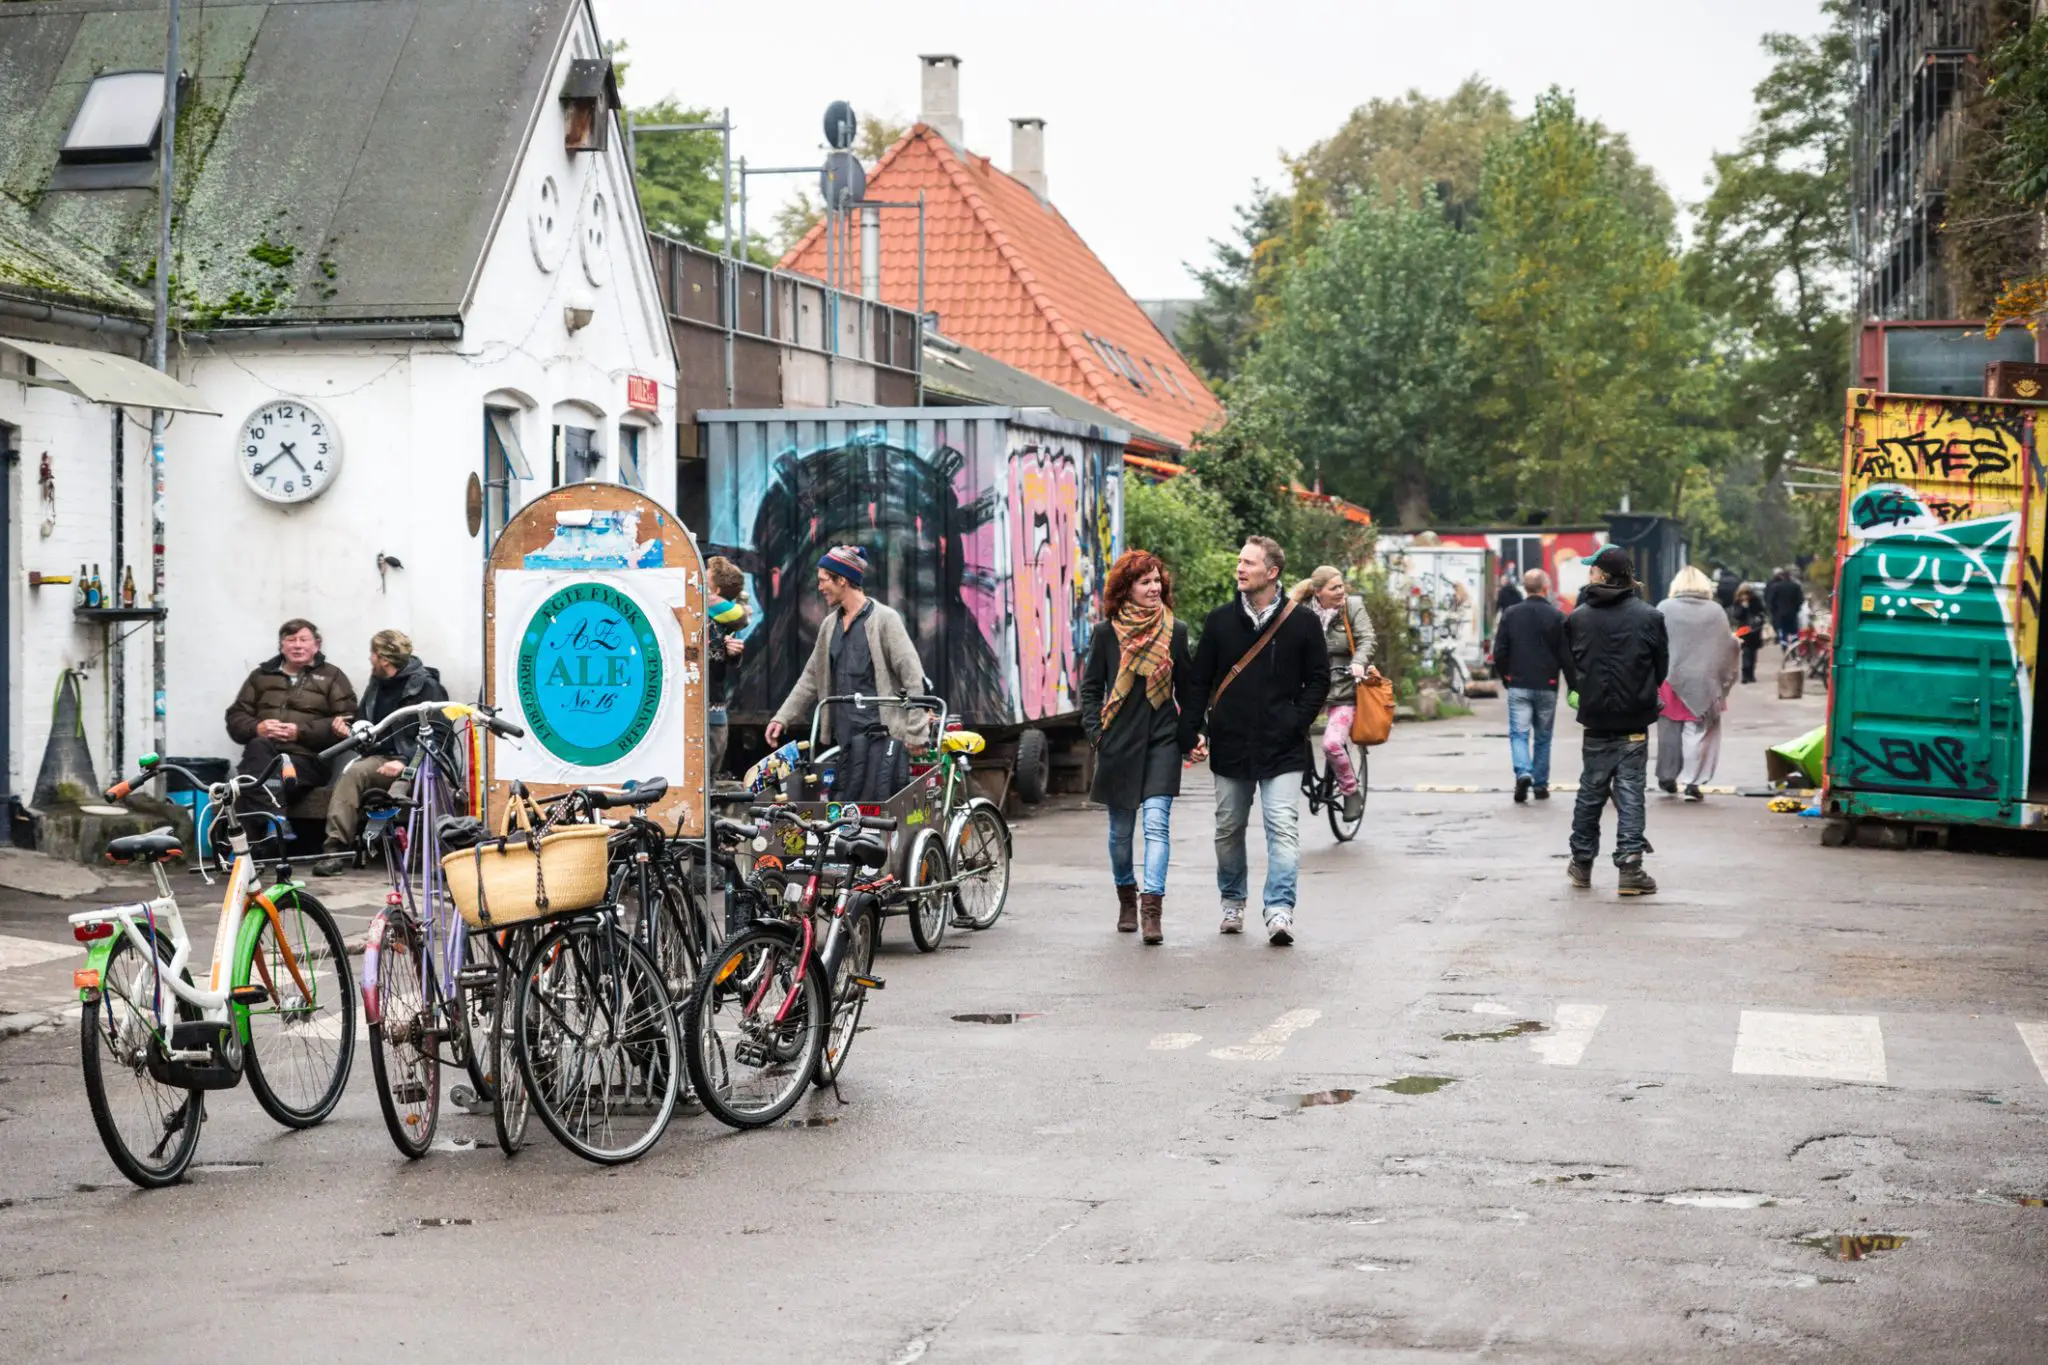 How free is Denmark’s Freetown of Christiania?